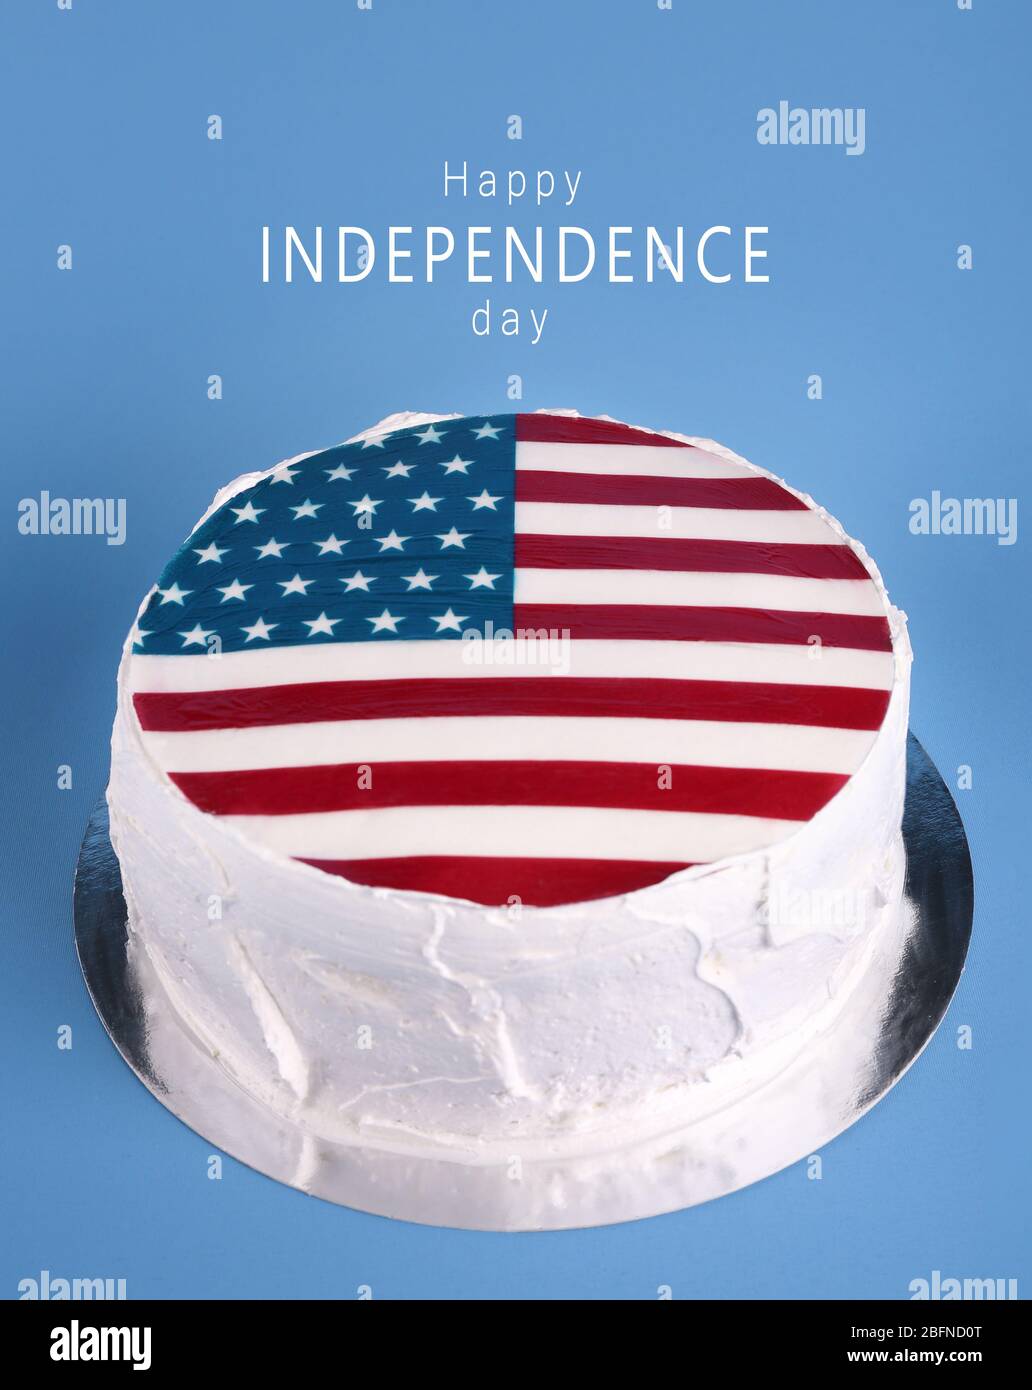 Independence Day Bento Cake | Corporate Gifting - The Elegance